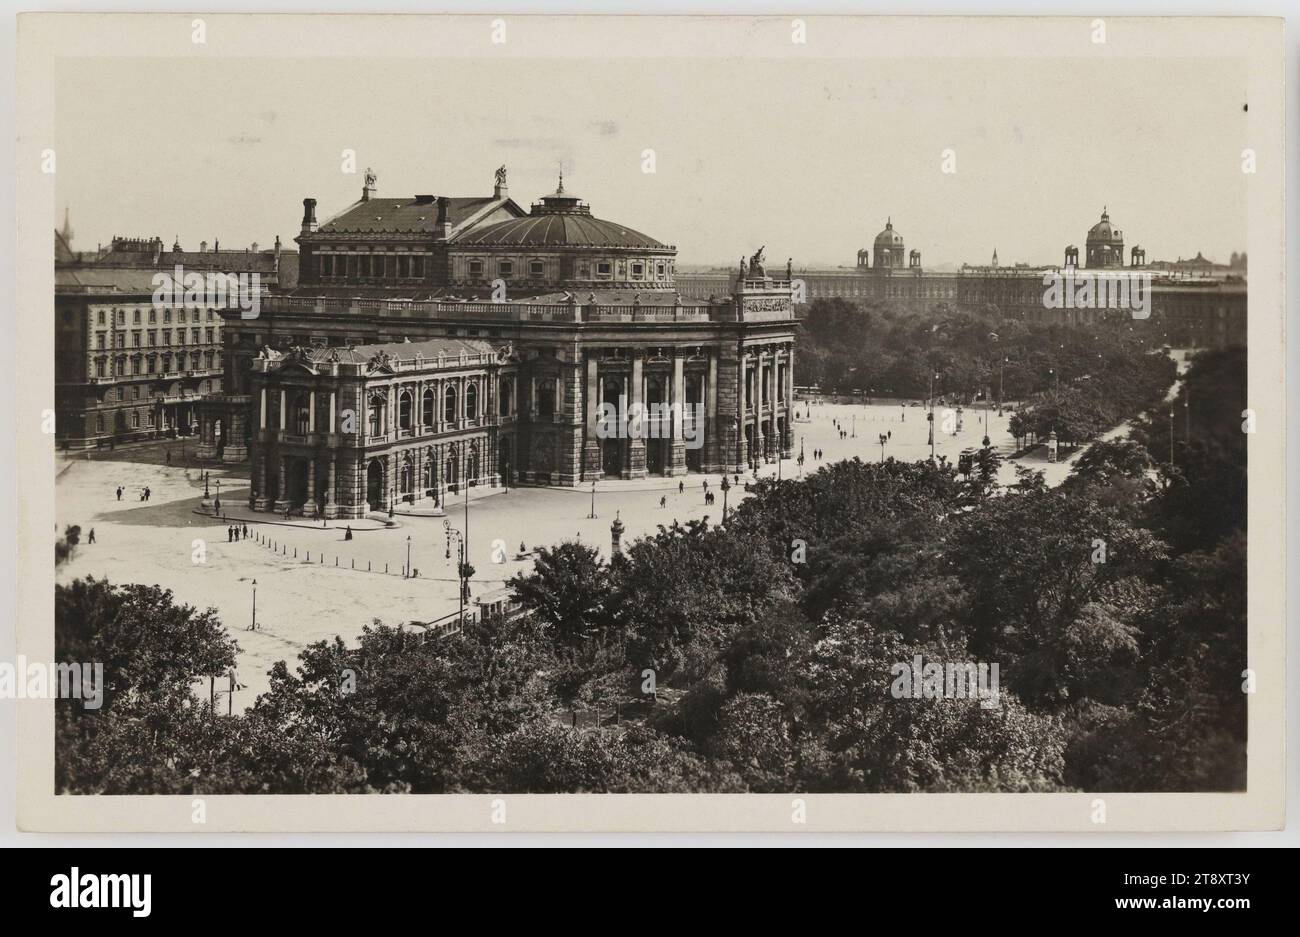 Vienna I., Burgtheater, Postkarten-Industrie AG, Vienna (POSTIAG), Producer, 1927, paperboard, gelatin silver paper, Inscription, FROM, Vienna, TO, Graz, ADDRESS, Graz Körösistr. 72, MESSAGE, Dear Mom! Did you receive the letter? In the meantime I have received the letters, but there is nothing. Now I will wait and only then will I see what is going on. Yours sincerely, Charly, Ringstraße, Theatre, Attractions, Media and Communication, Postcards with transliteration, 1st District: Innere Stadt, theatre (building), Burgtheater, handwriting, written text, Universitätsring Stock Photo